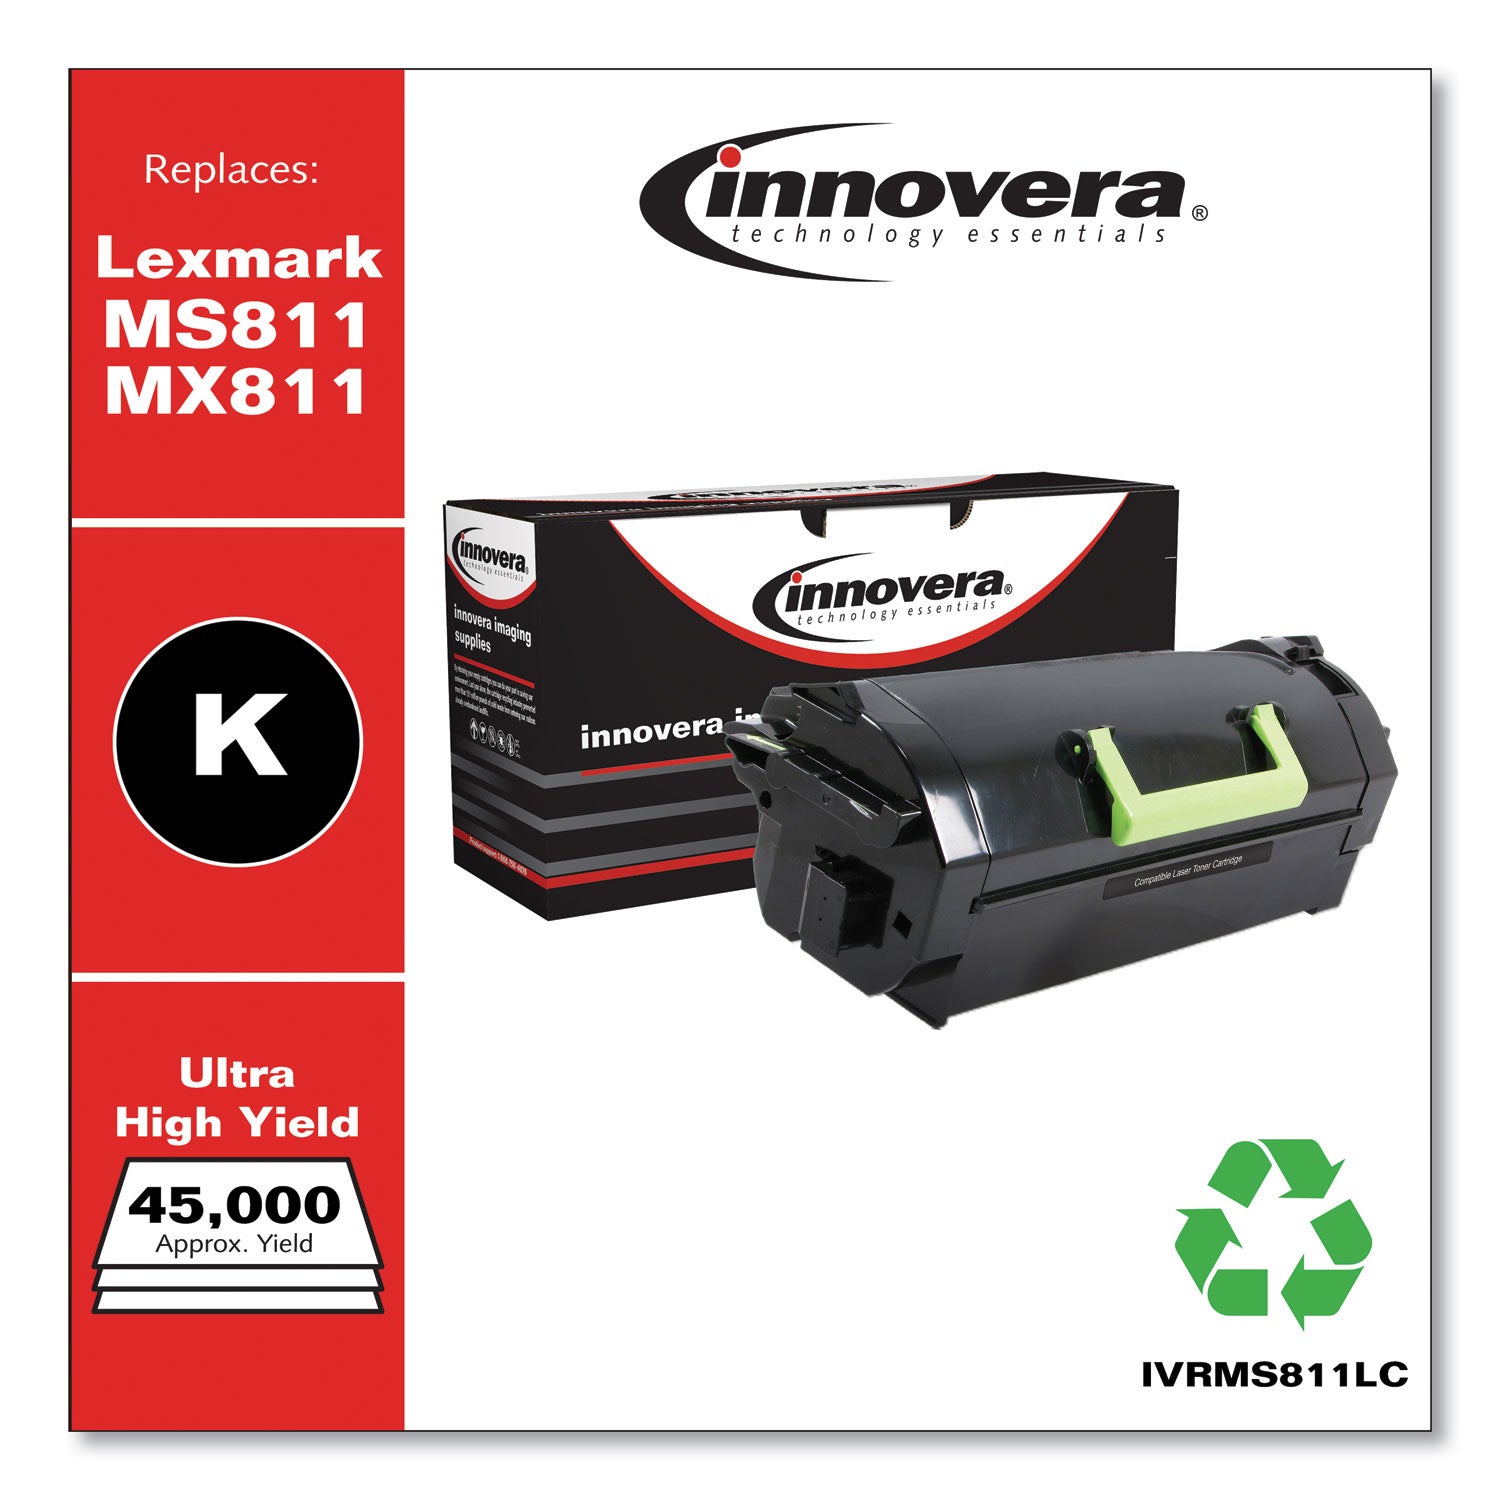 remanufactured-black-ultra-high-yield-toner-replacement-for-ms811-mx811-45000-page-yield-ships-in-1-3-business-days_ivrms811lc - 2